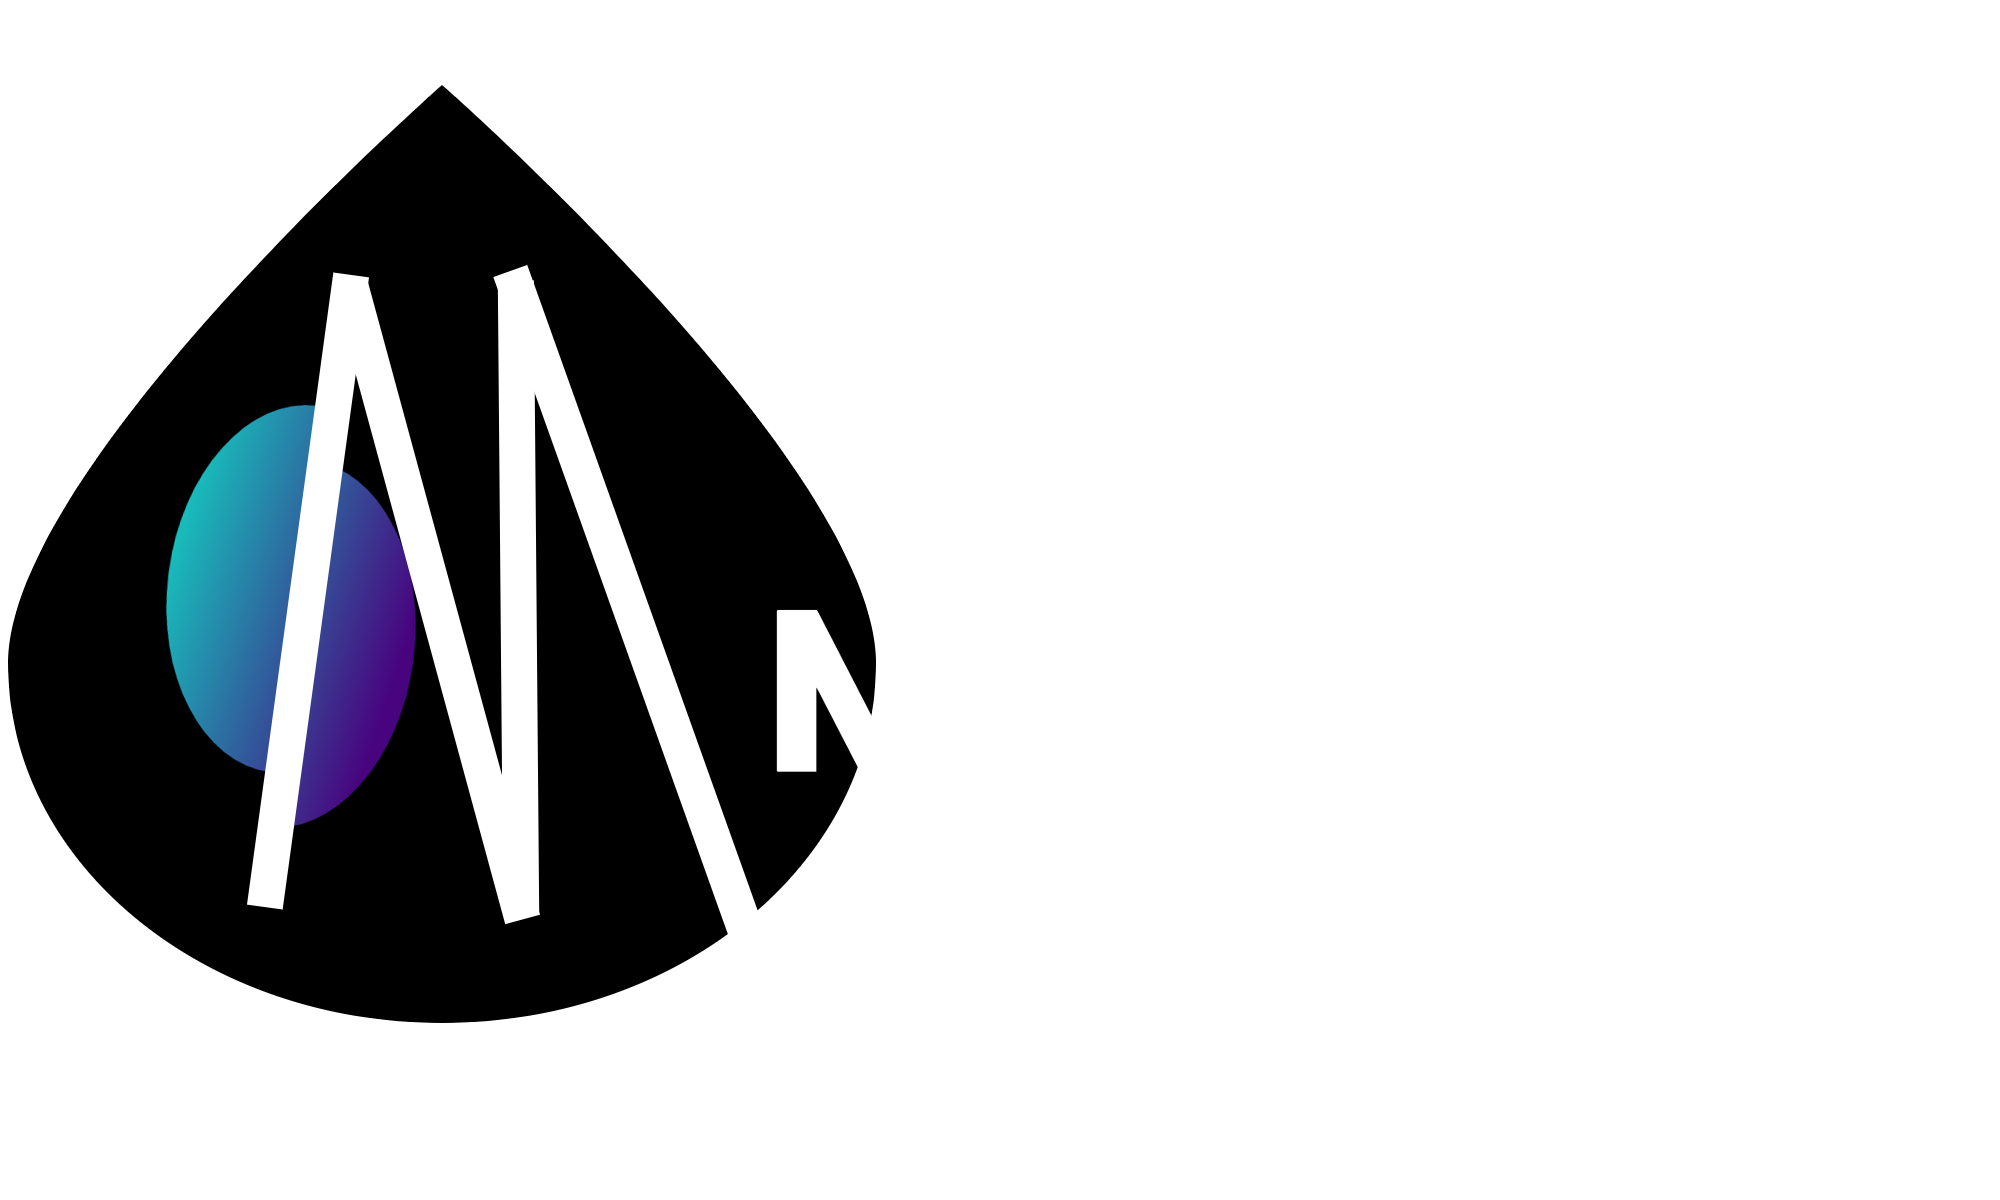 An M on a Black teardrop with a teal and purple embellishment. The logo for The Mellow.